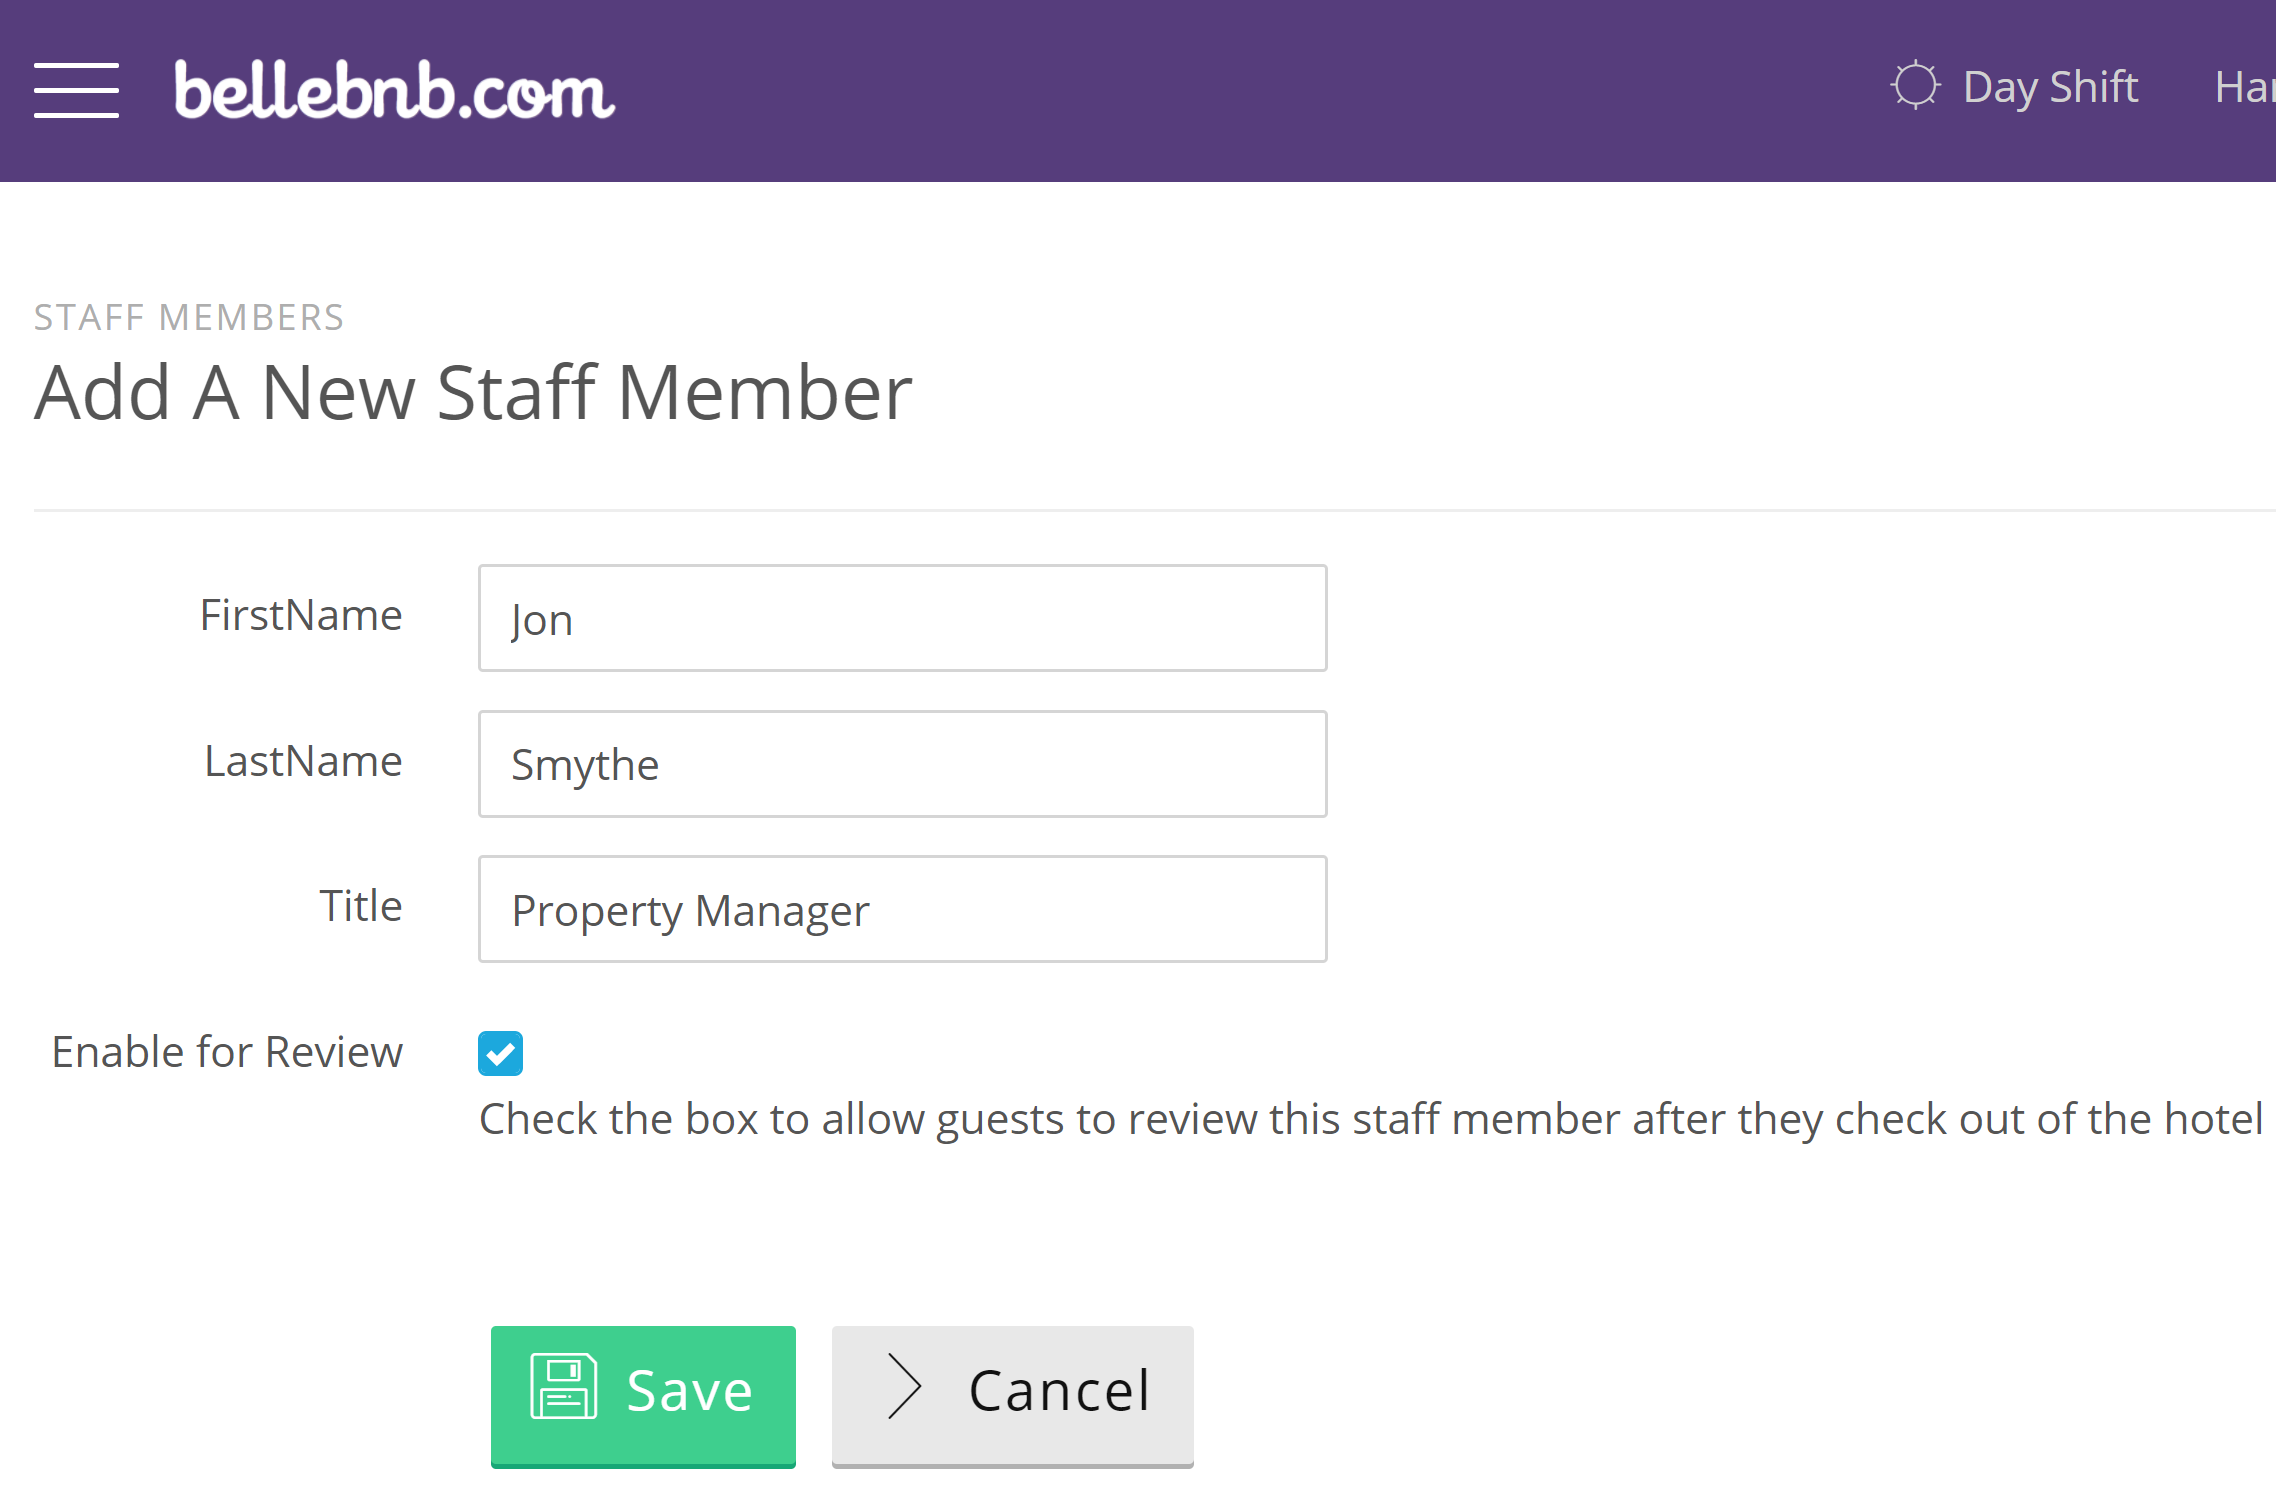  Hotel Staff’ in the left navigation menu, then click ‘Add a Staff Member.’ Enter the staff member’s name and check the box if you would like to enable them for review